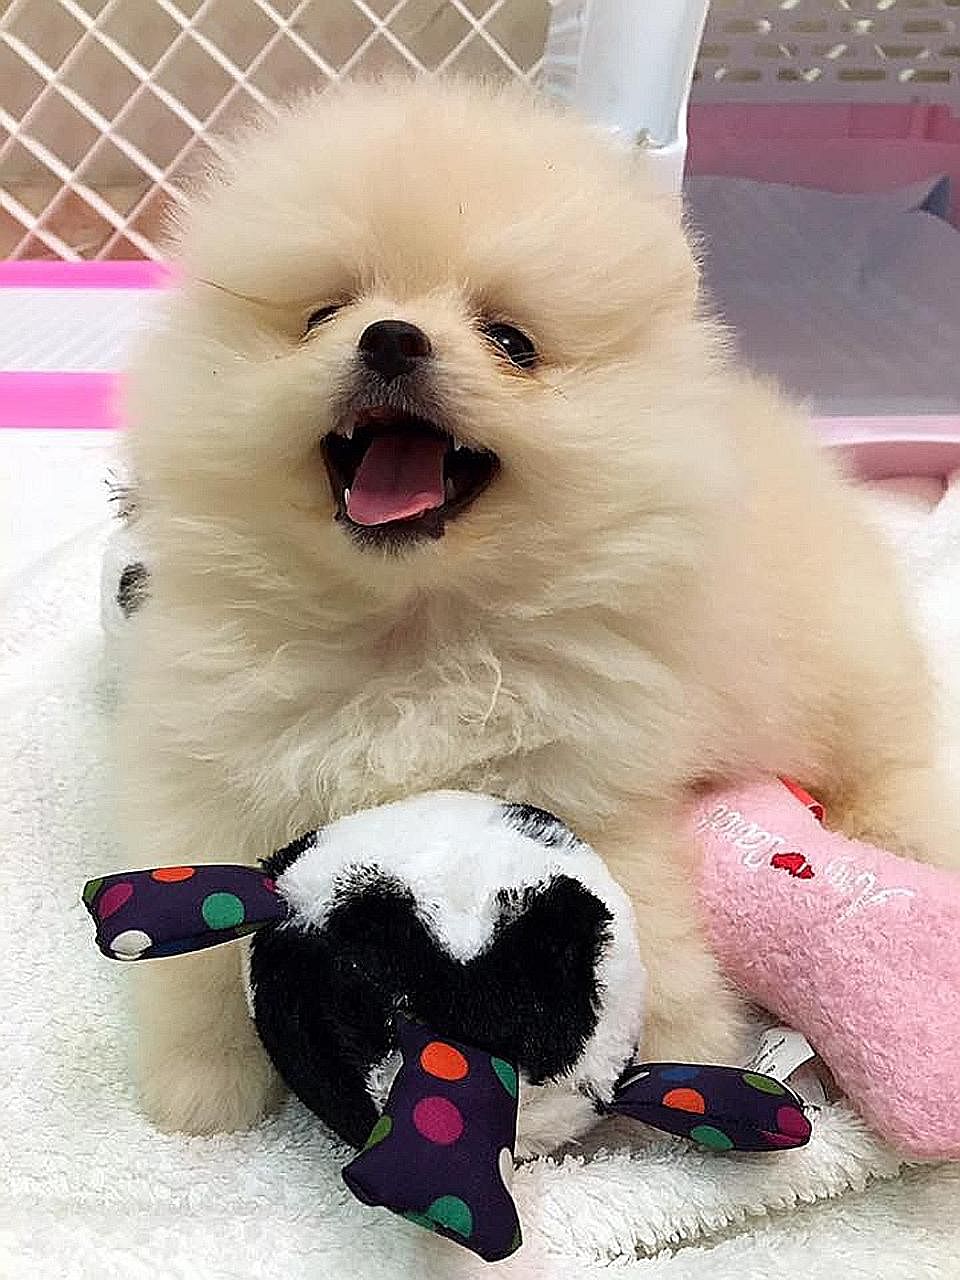 Fatty Paws customer Jorine Lim's puppy, named Mimi, a white pomeranian, died from the canine parvovirus a week after she bought it. She claims it was infected with the disease, spread through dog's faeces, while at the shop. Her Facebook post has bee